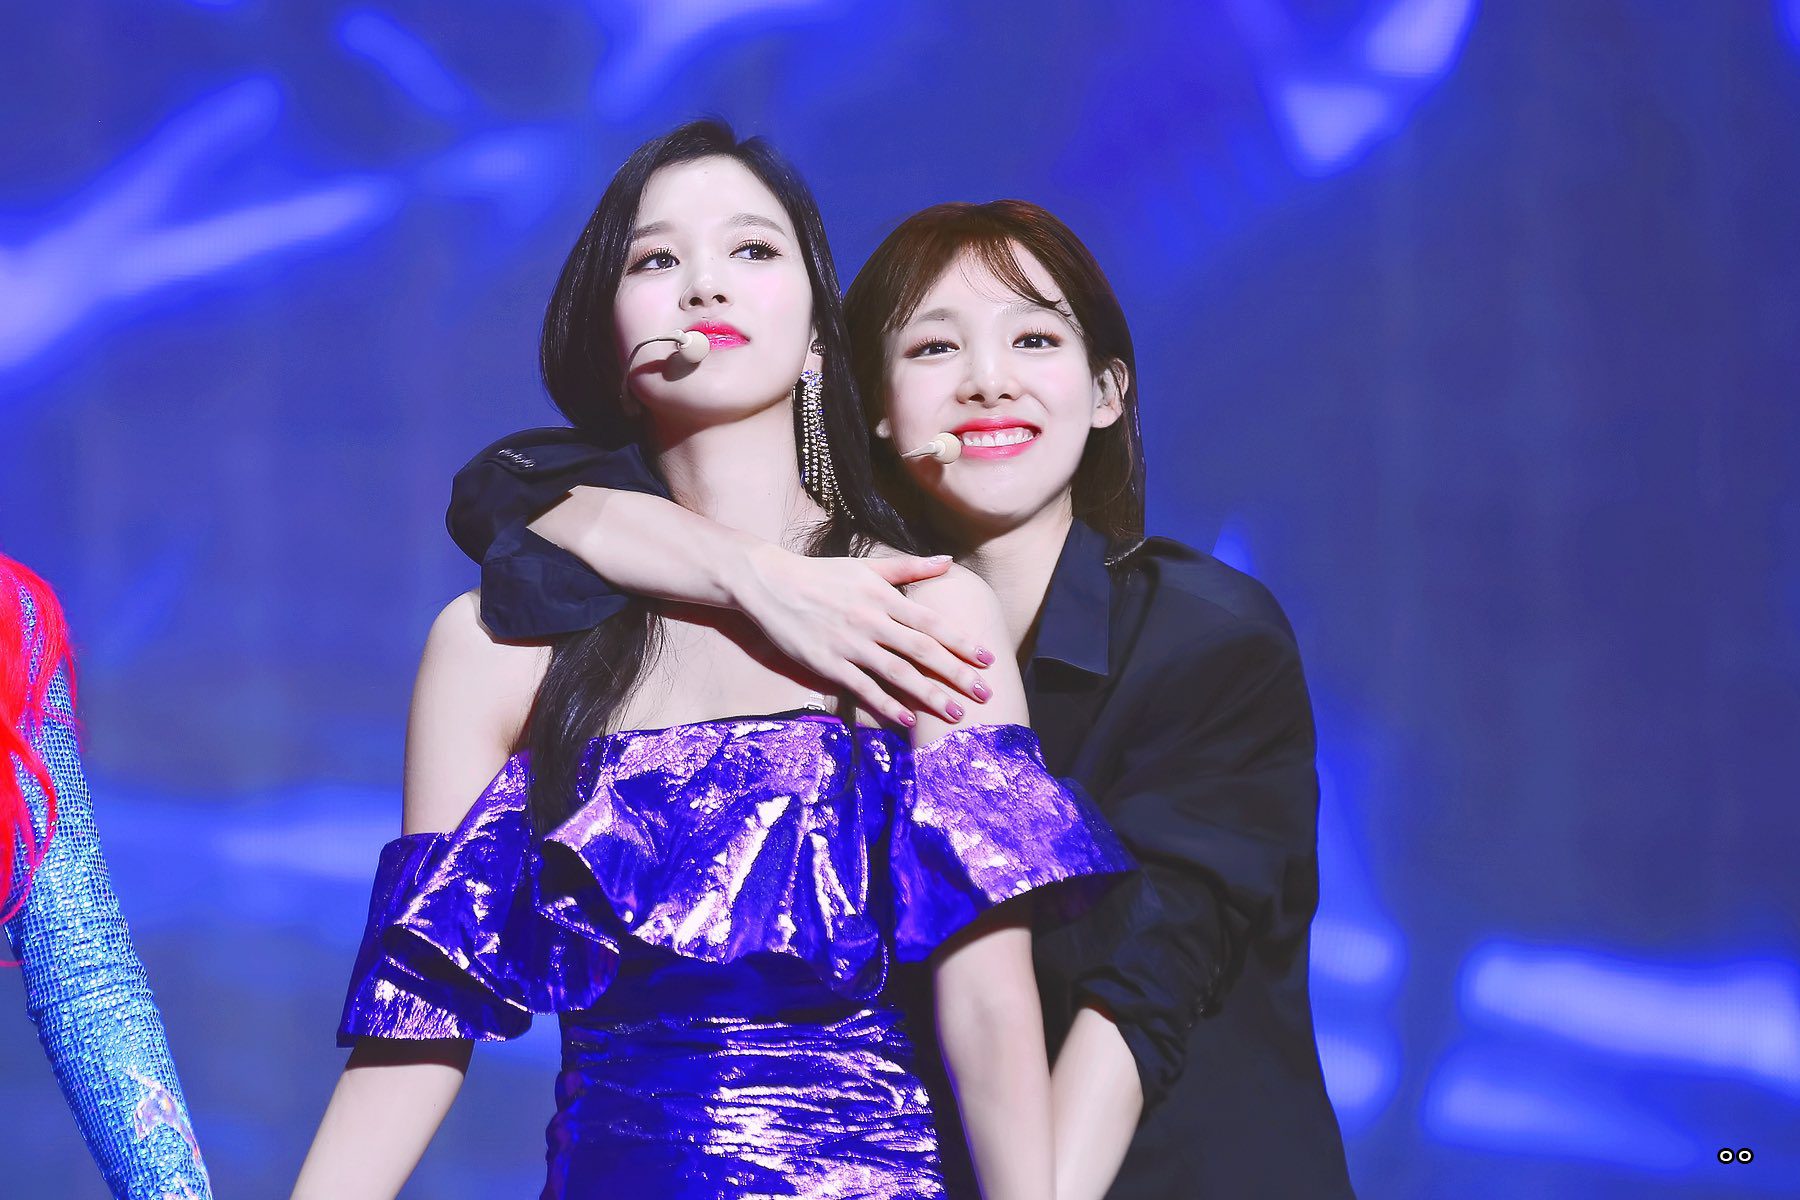 Nayeon from Twice hugging and clinging to other members